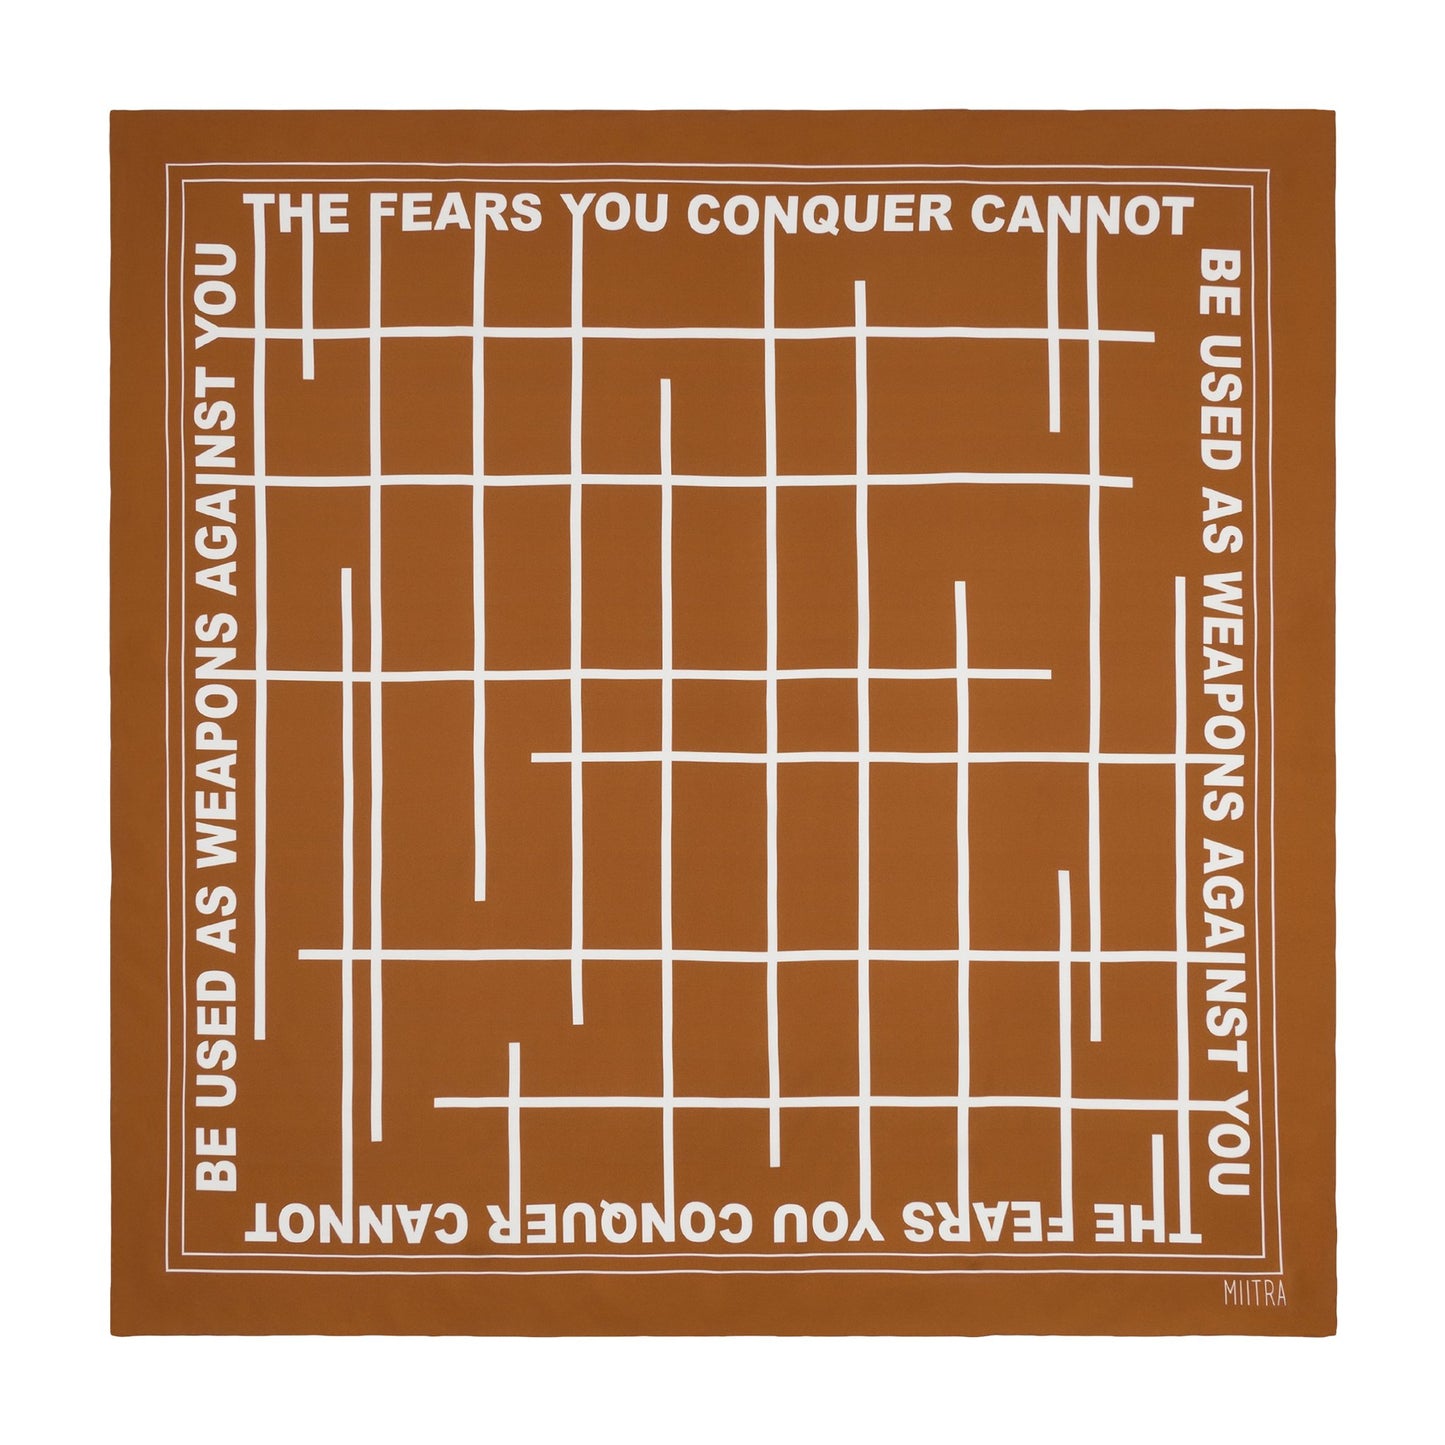 Brown silk scarf that says the fears you conquer cannot be used as weapons against you?id=22984469872827